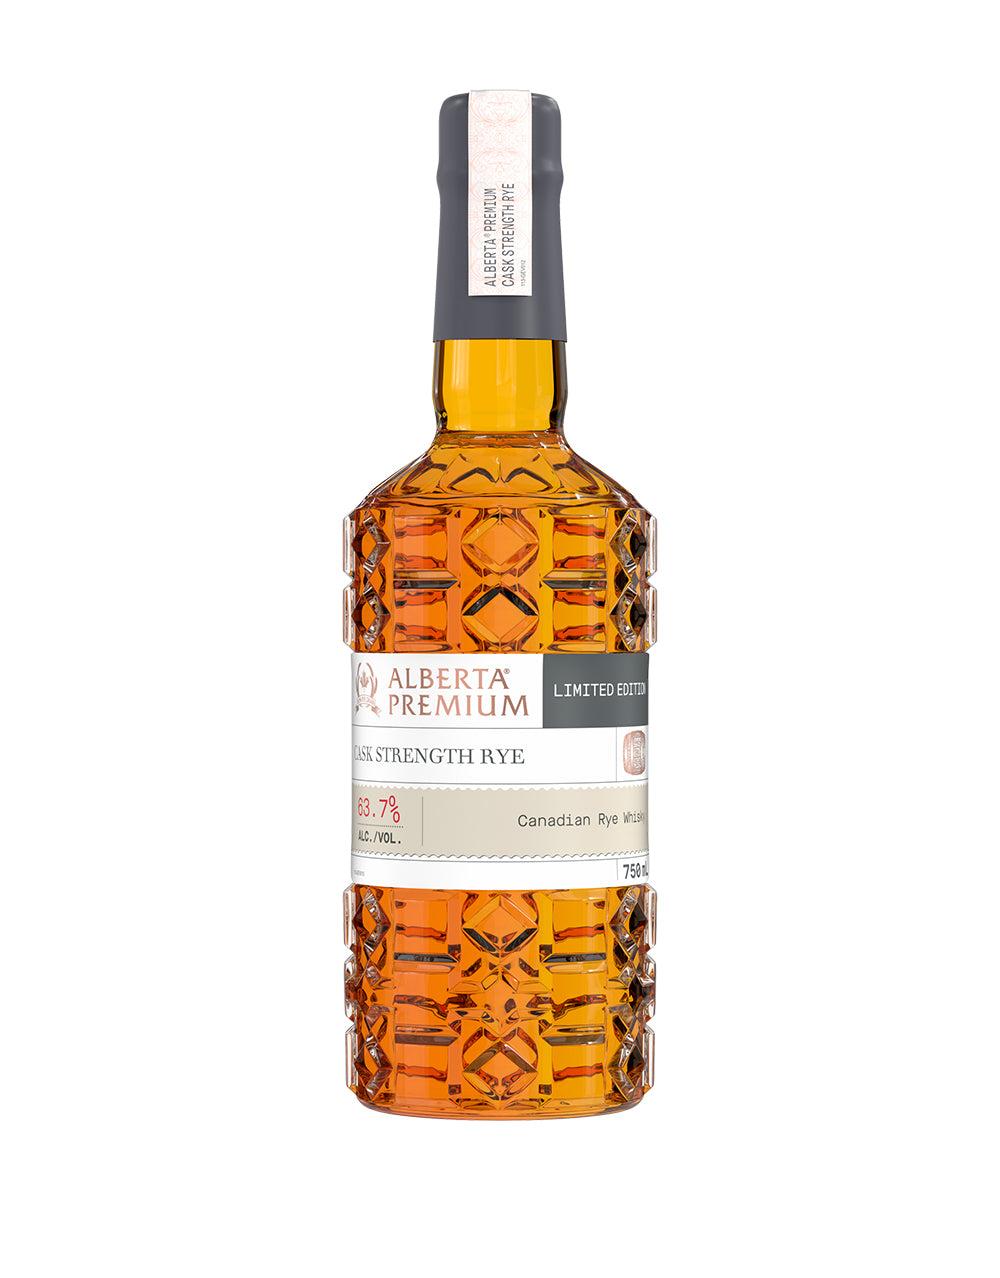 Alberta Premium Limited Edition Cask Strength Canadian Rye Whisky